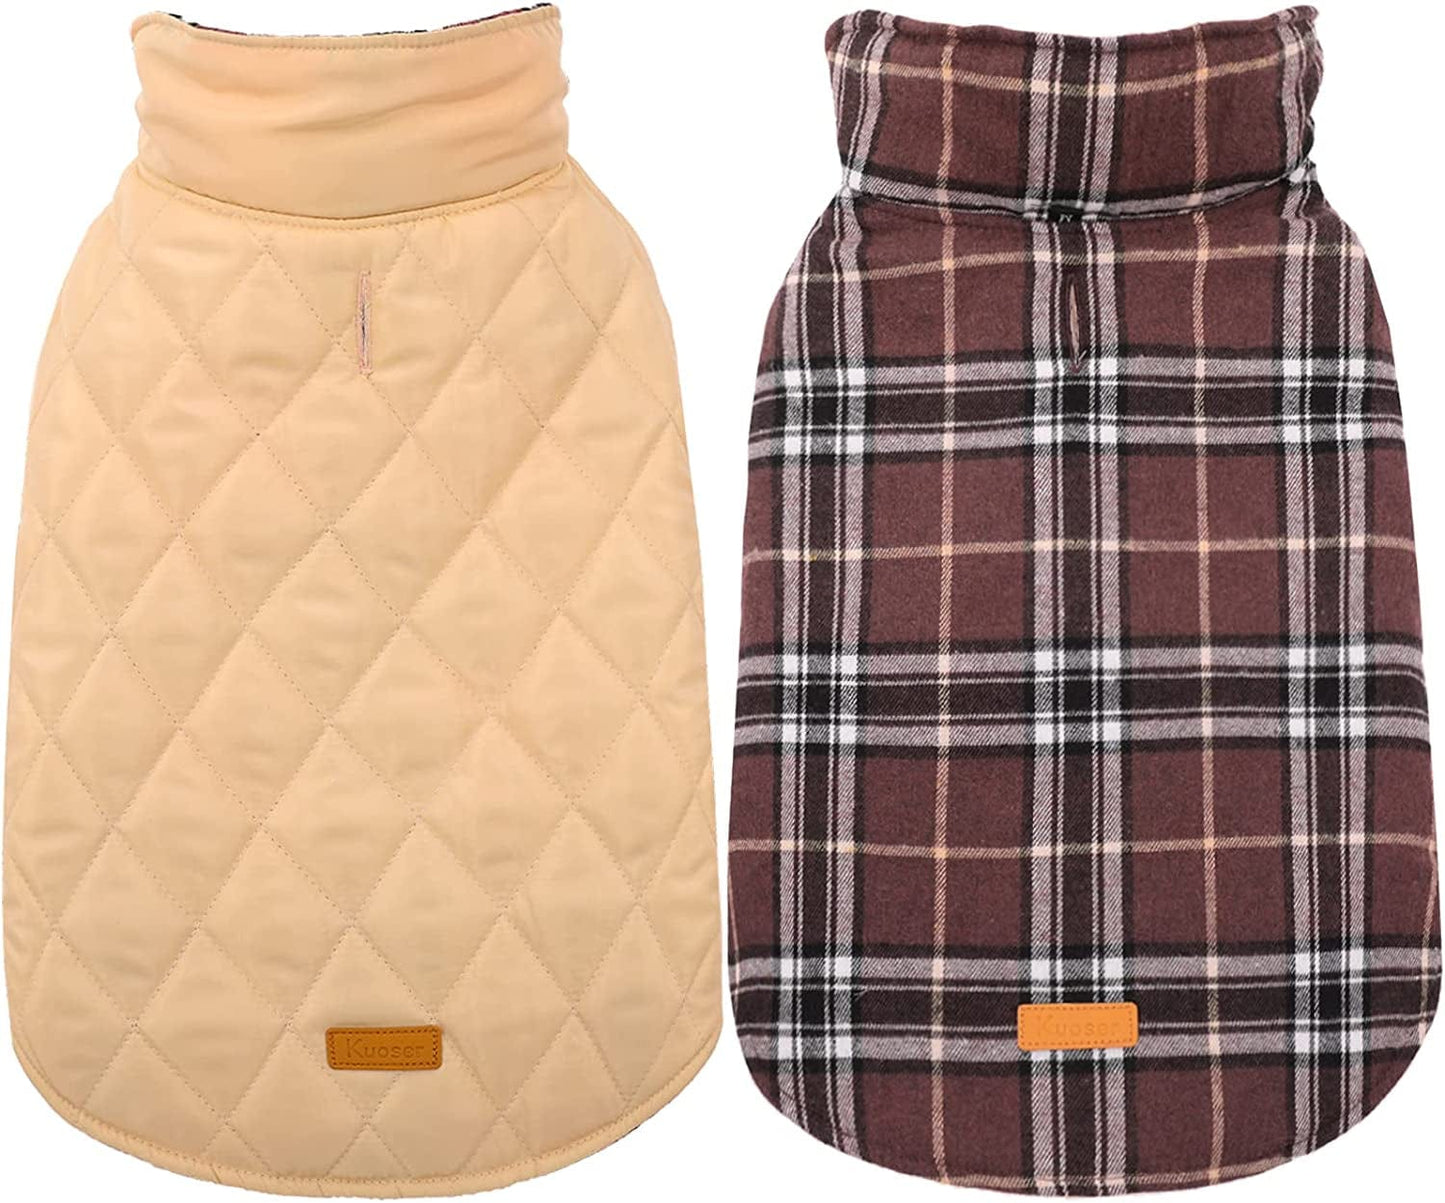 Kuoser Warm Dog Coat, Reversible Dog Jacket Waterproof Dog Winter Coat British Style Plaid Dog Clothes Pet Dog Cold Weather Coats Cozy Snow Jacket Vest for Small Medium Large Dogs Red M Animals & Pet Supplies > Pet Supplies > Dog Supplies > Dog Apparel Kuoser Brown Medium (Pack of 1) 